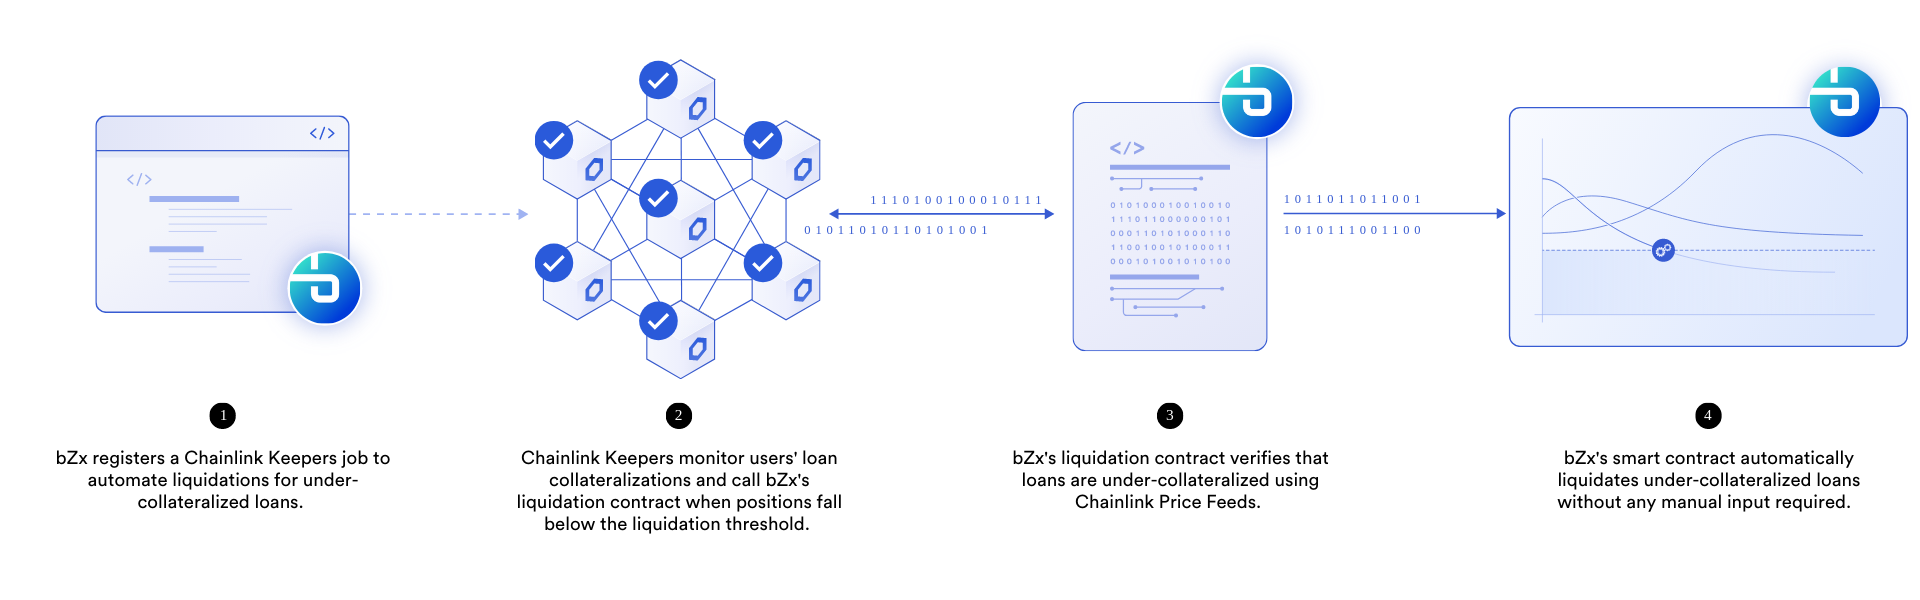 bZx Chainlink Price Feeds and Chainlink Keepers